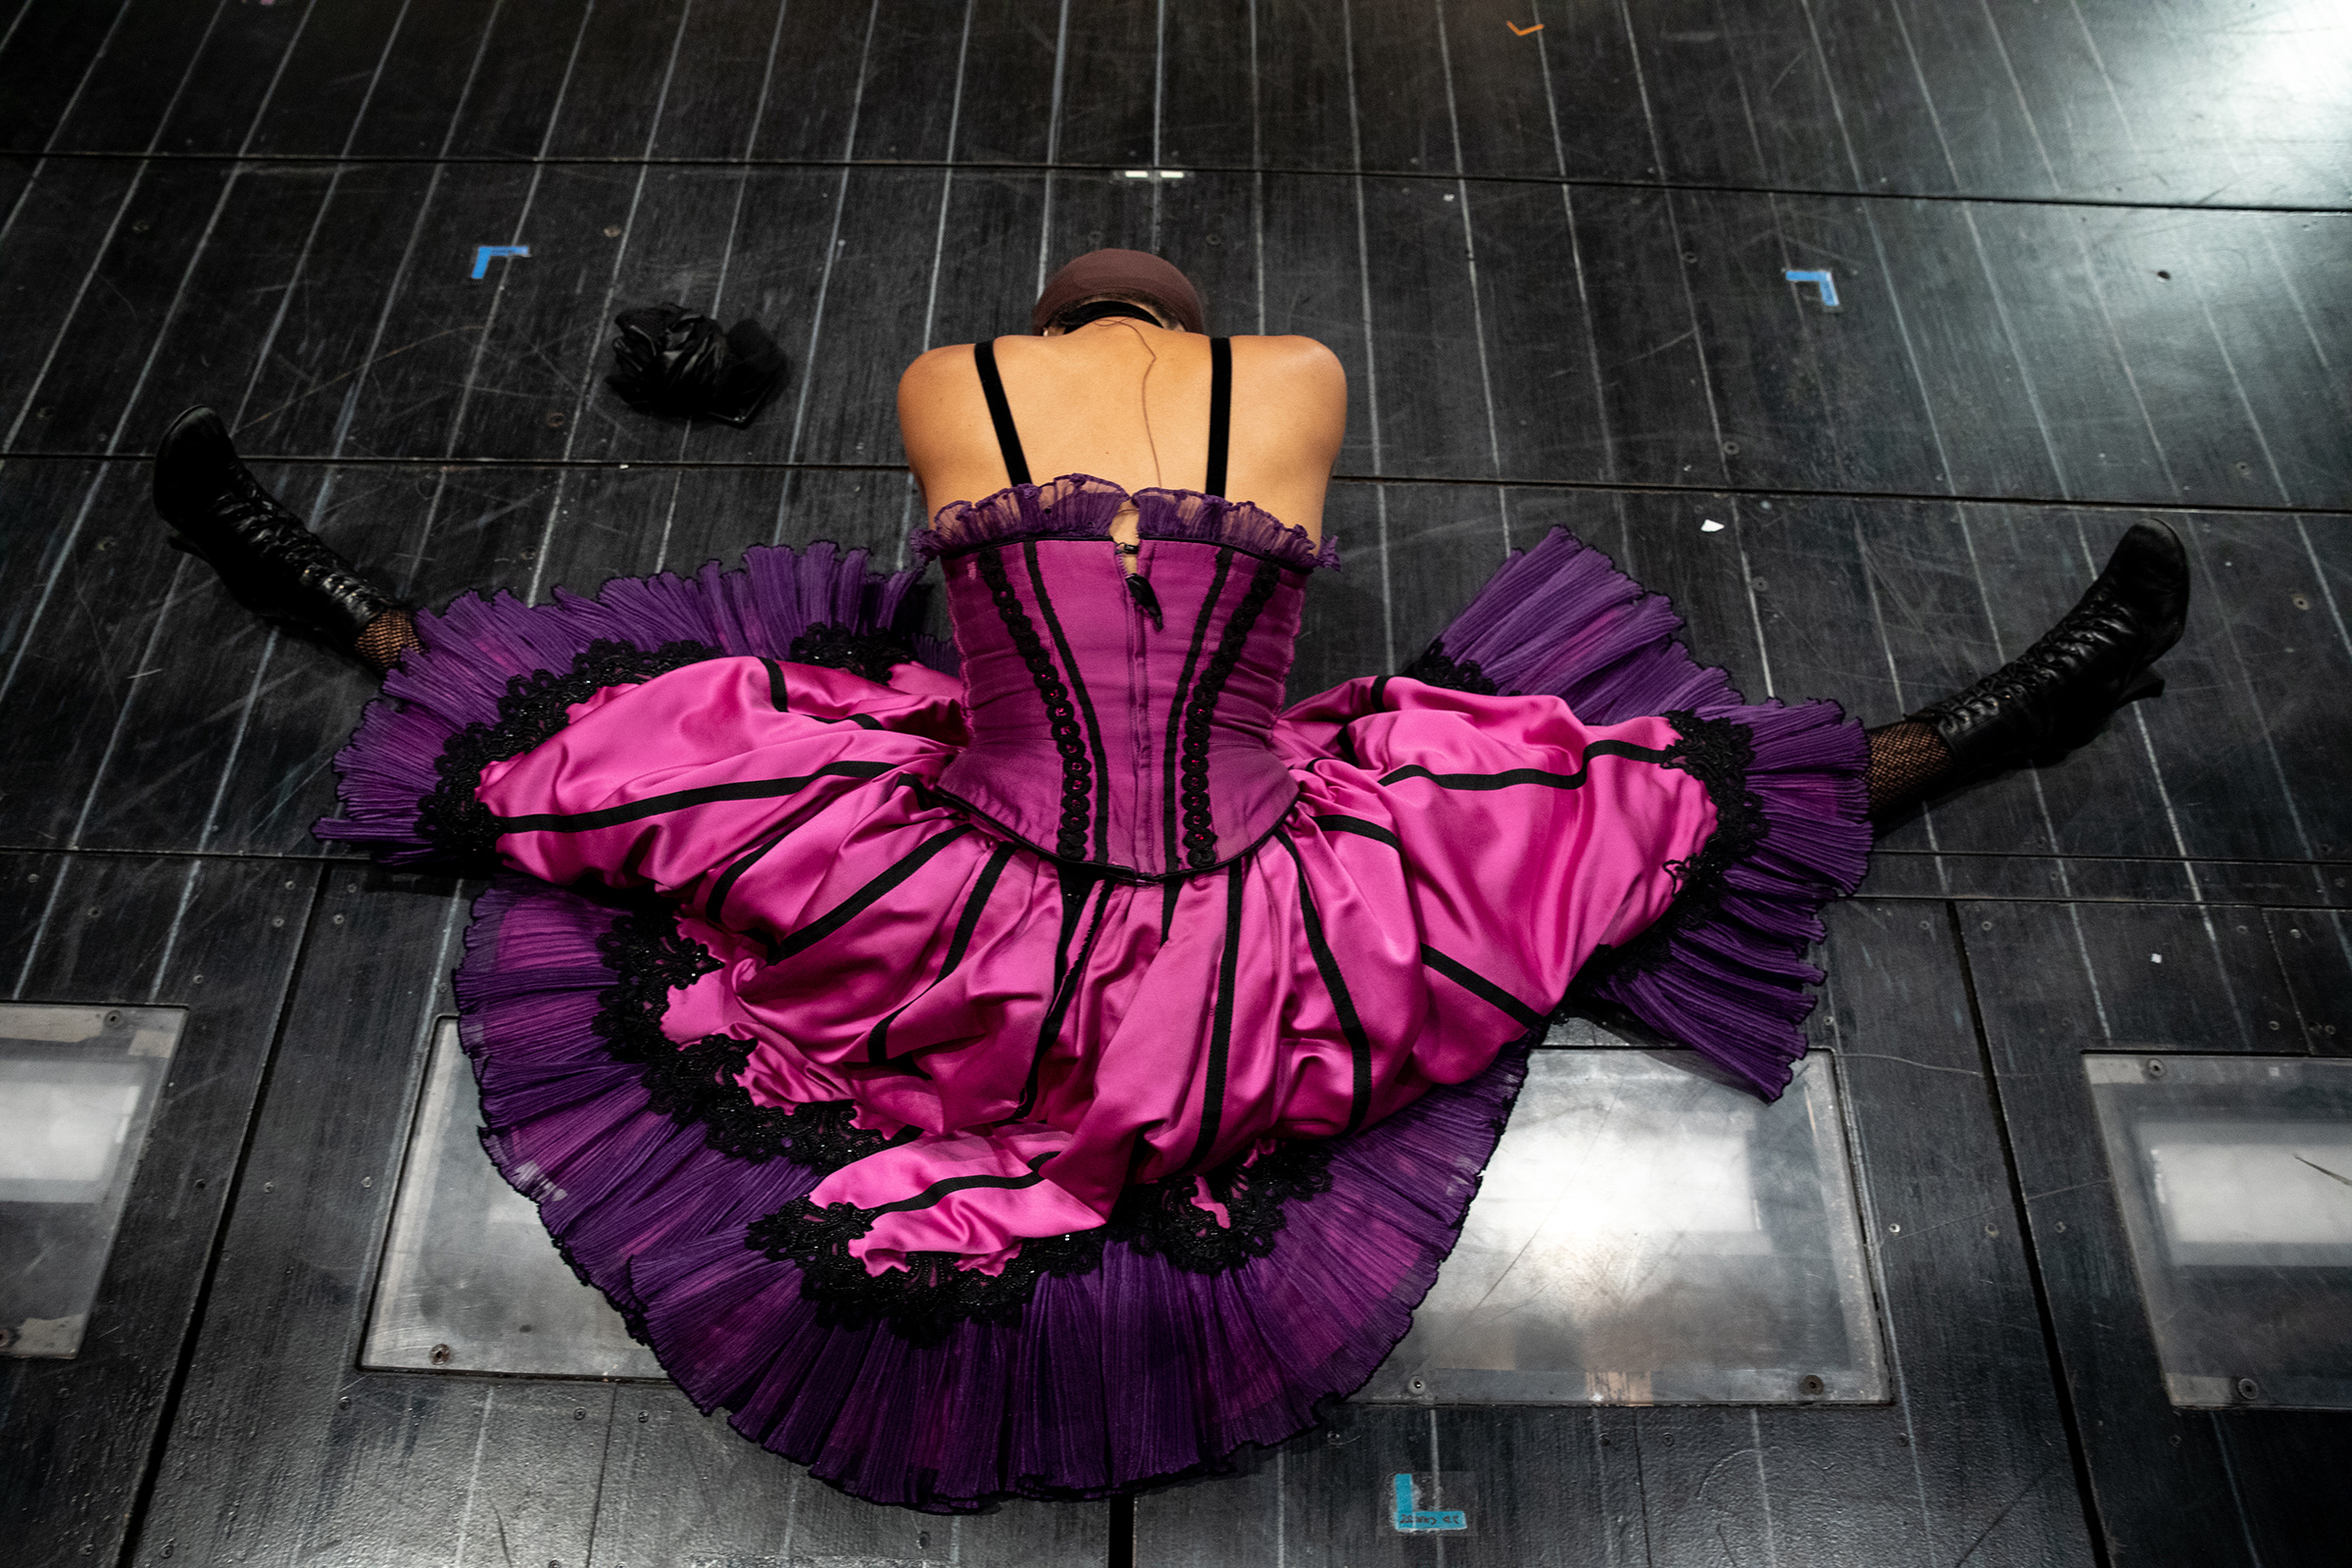 Ensemble member Bahiyah Hibah stretches on stage during rehearsal for <i>Moulin Rouge!</i> on Sept. 21, 2021 in New York, N.Y.